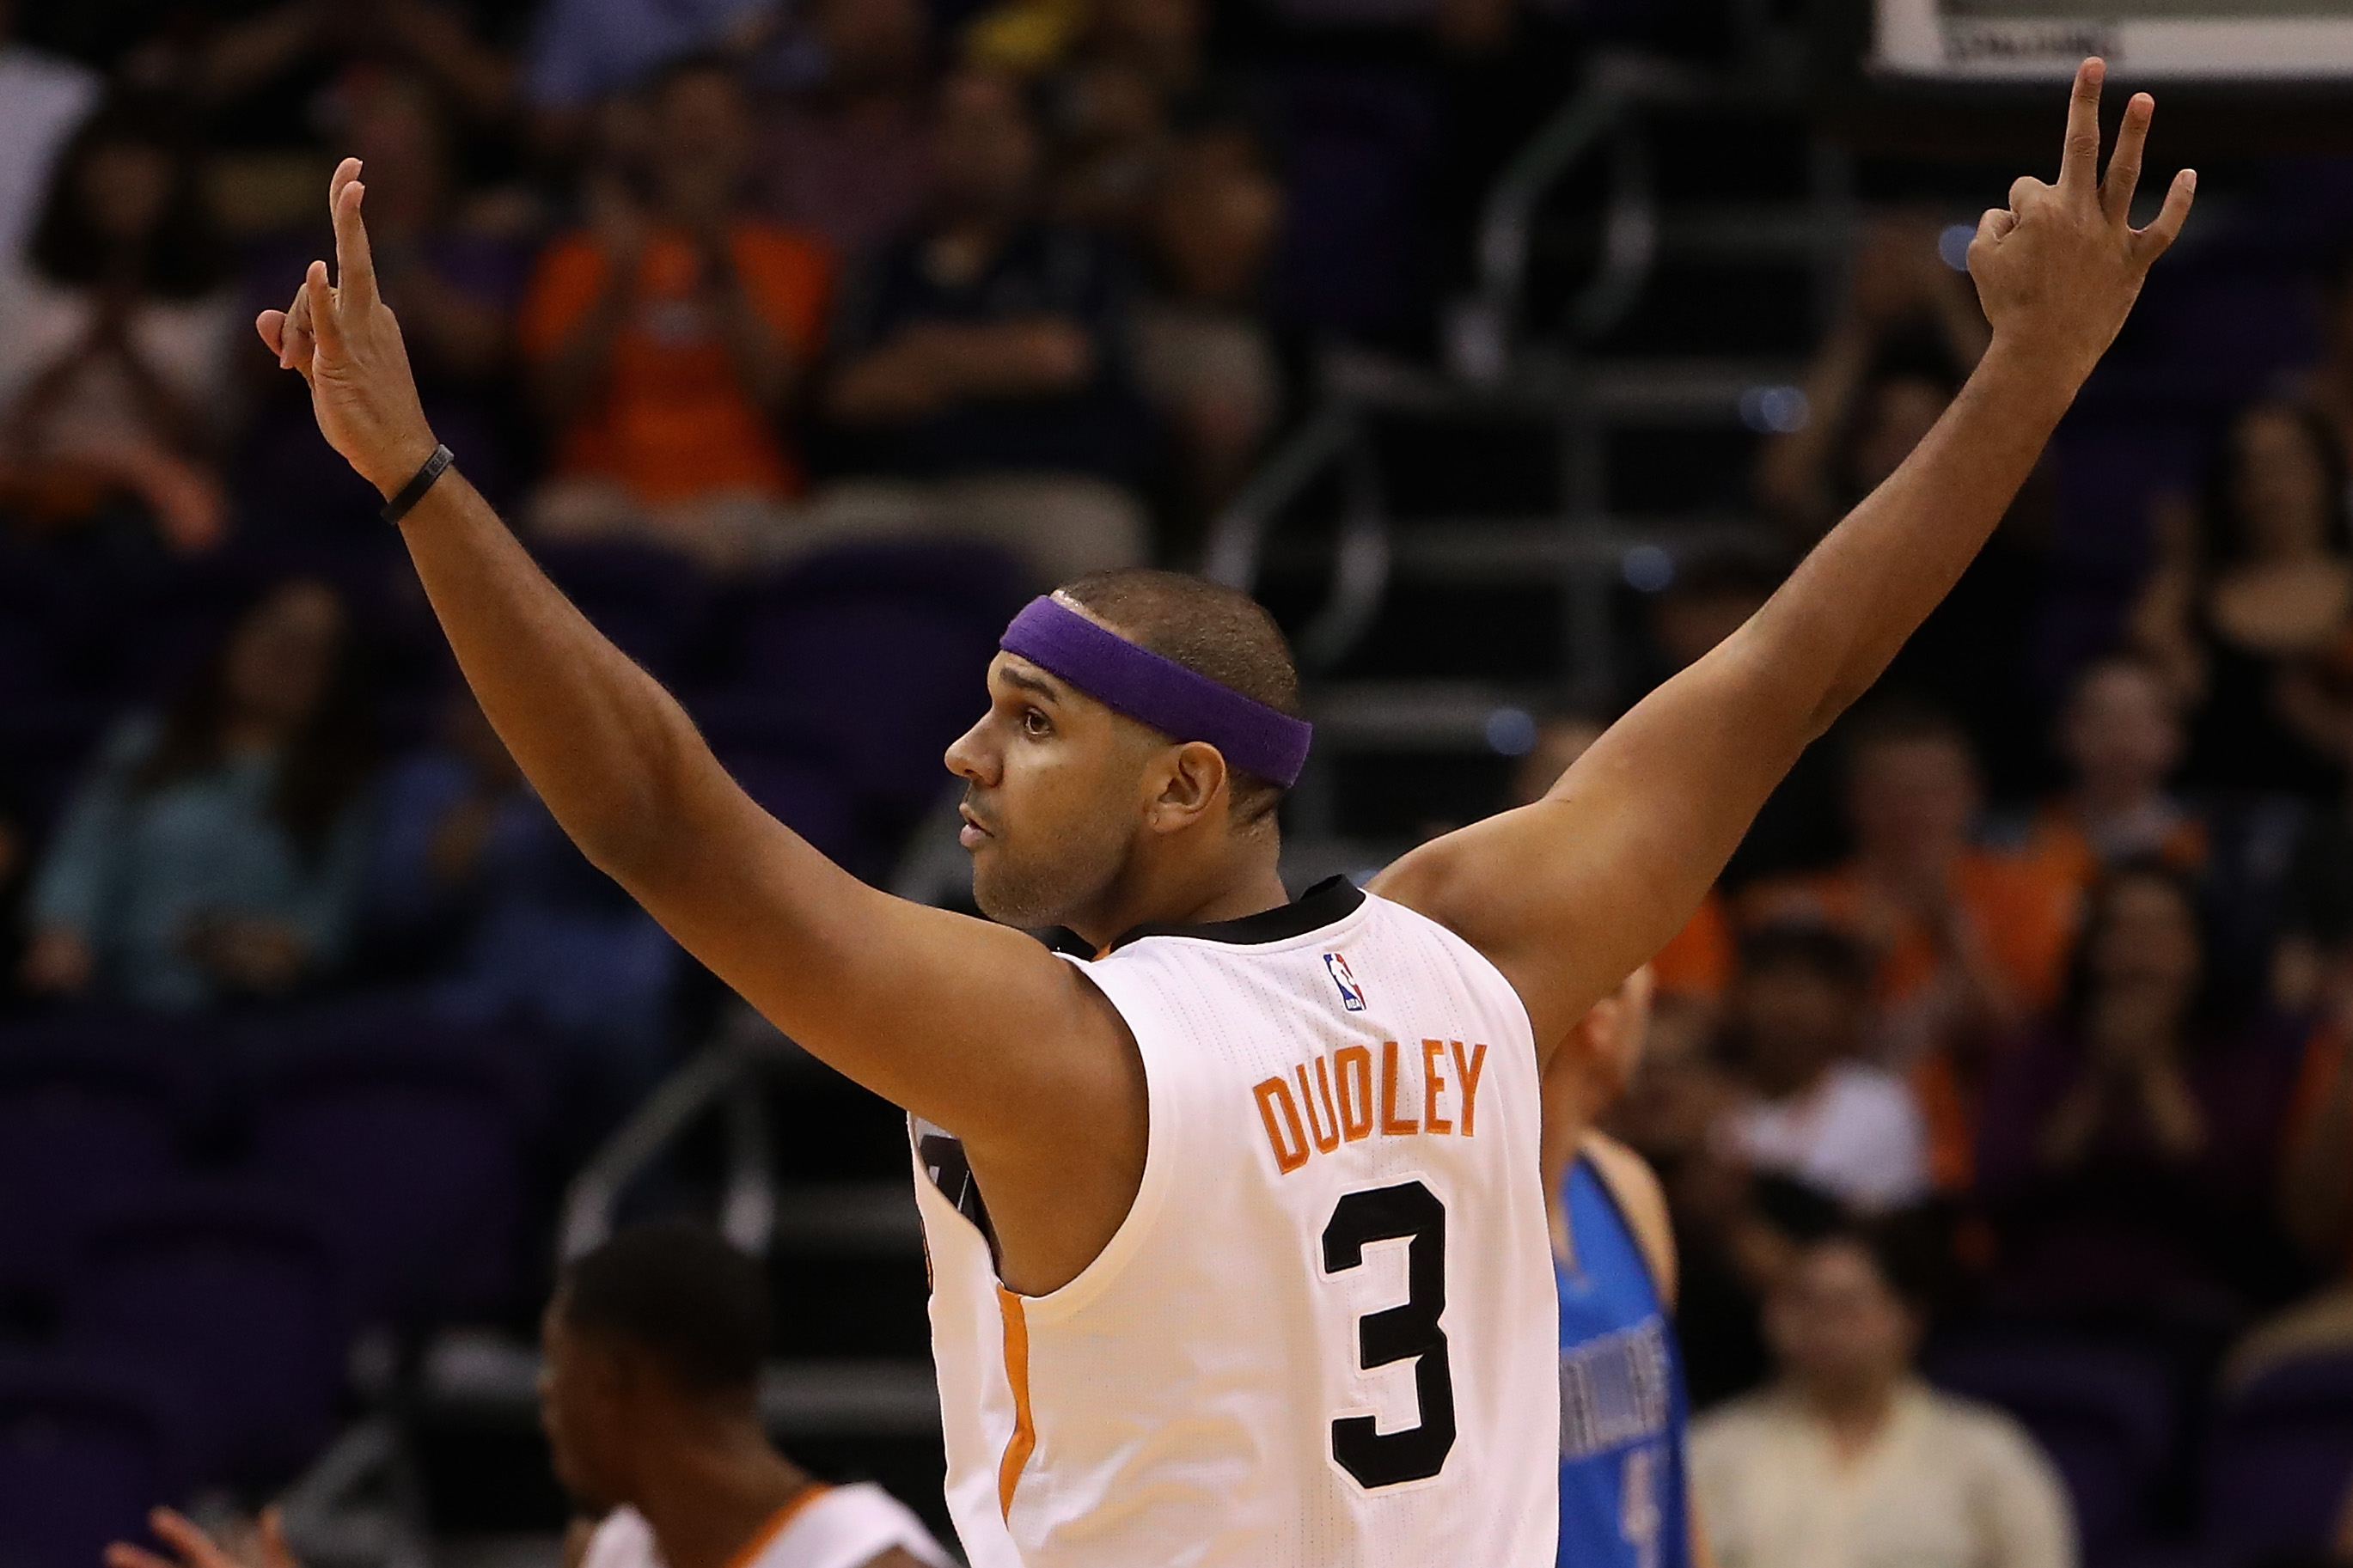 DO YOU KNOW JARED DUDLEY?